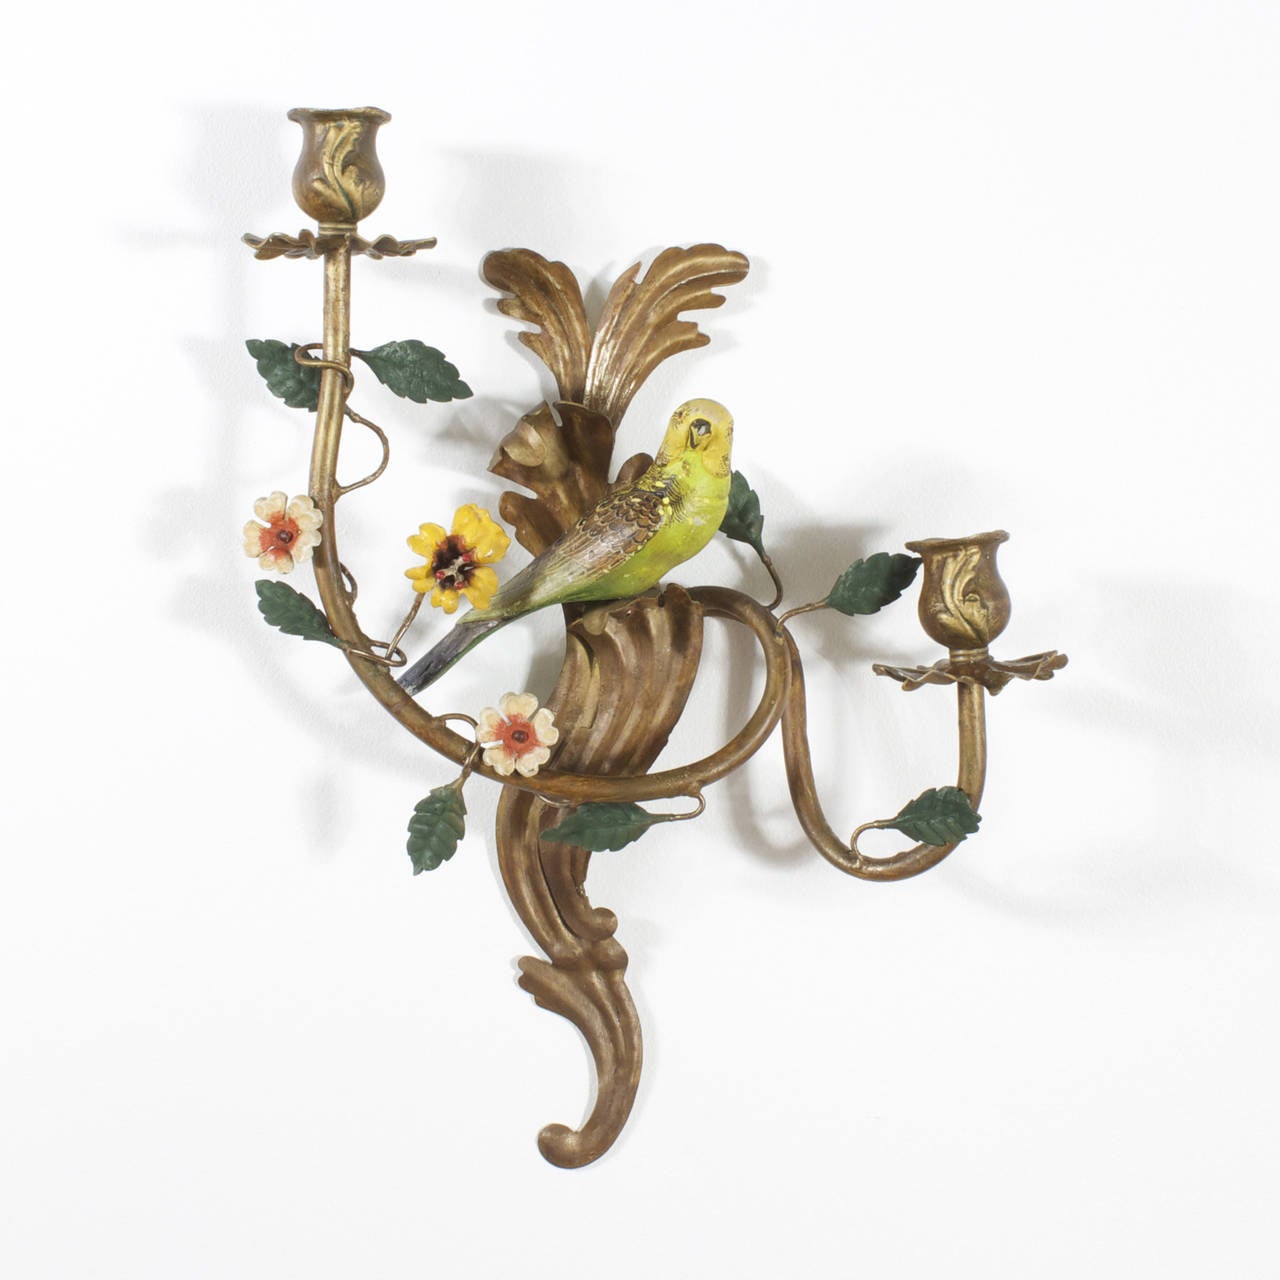 Amusing, opposing pair of Italian Tole sconces with rather happy yellow, green and brown parakeets set in a floral scene of gold painted acanthus leaves, and having 2 organic shaped arms decorated with colorful flowers and small green leaves.